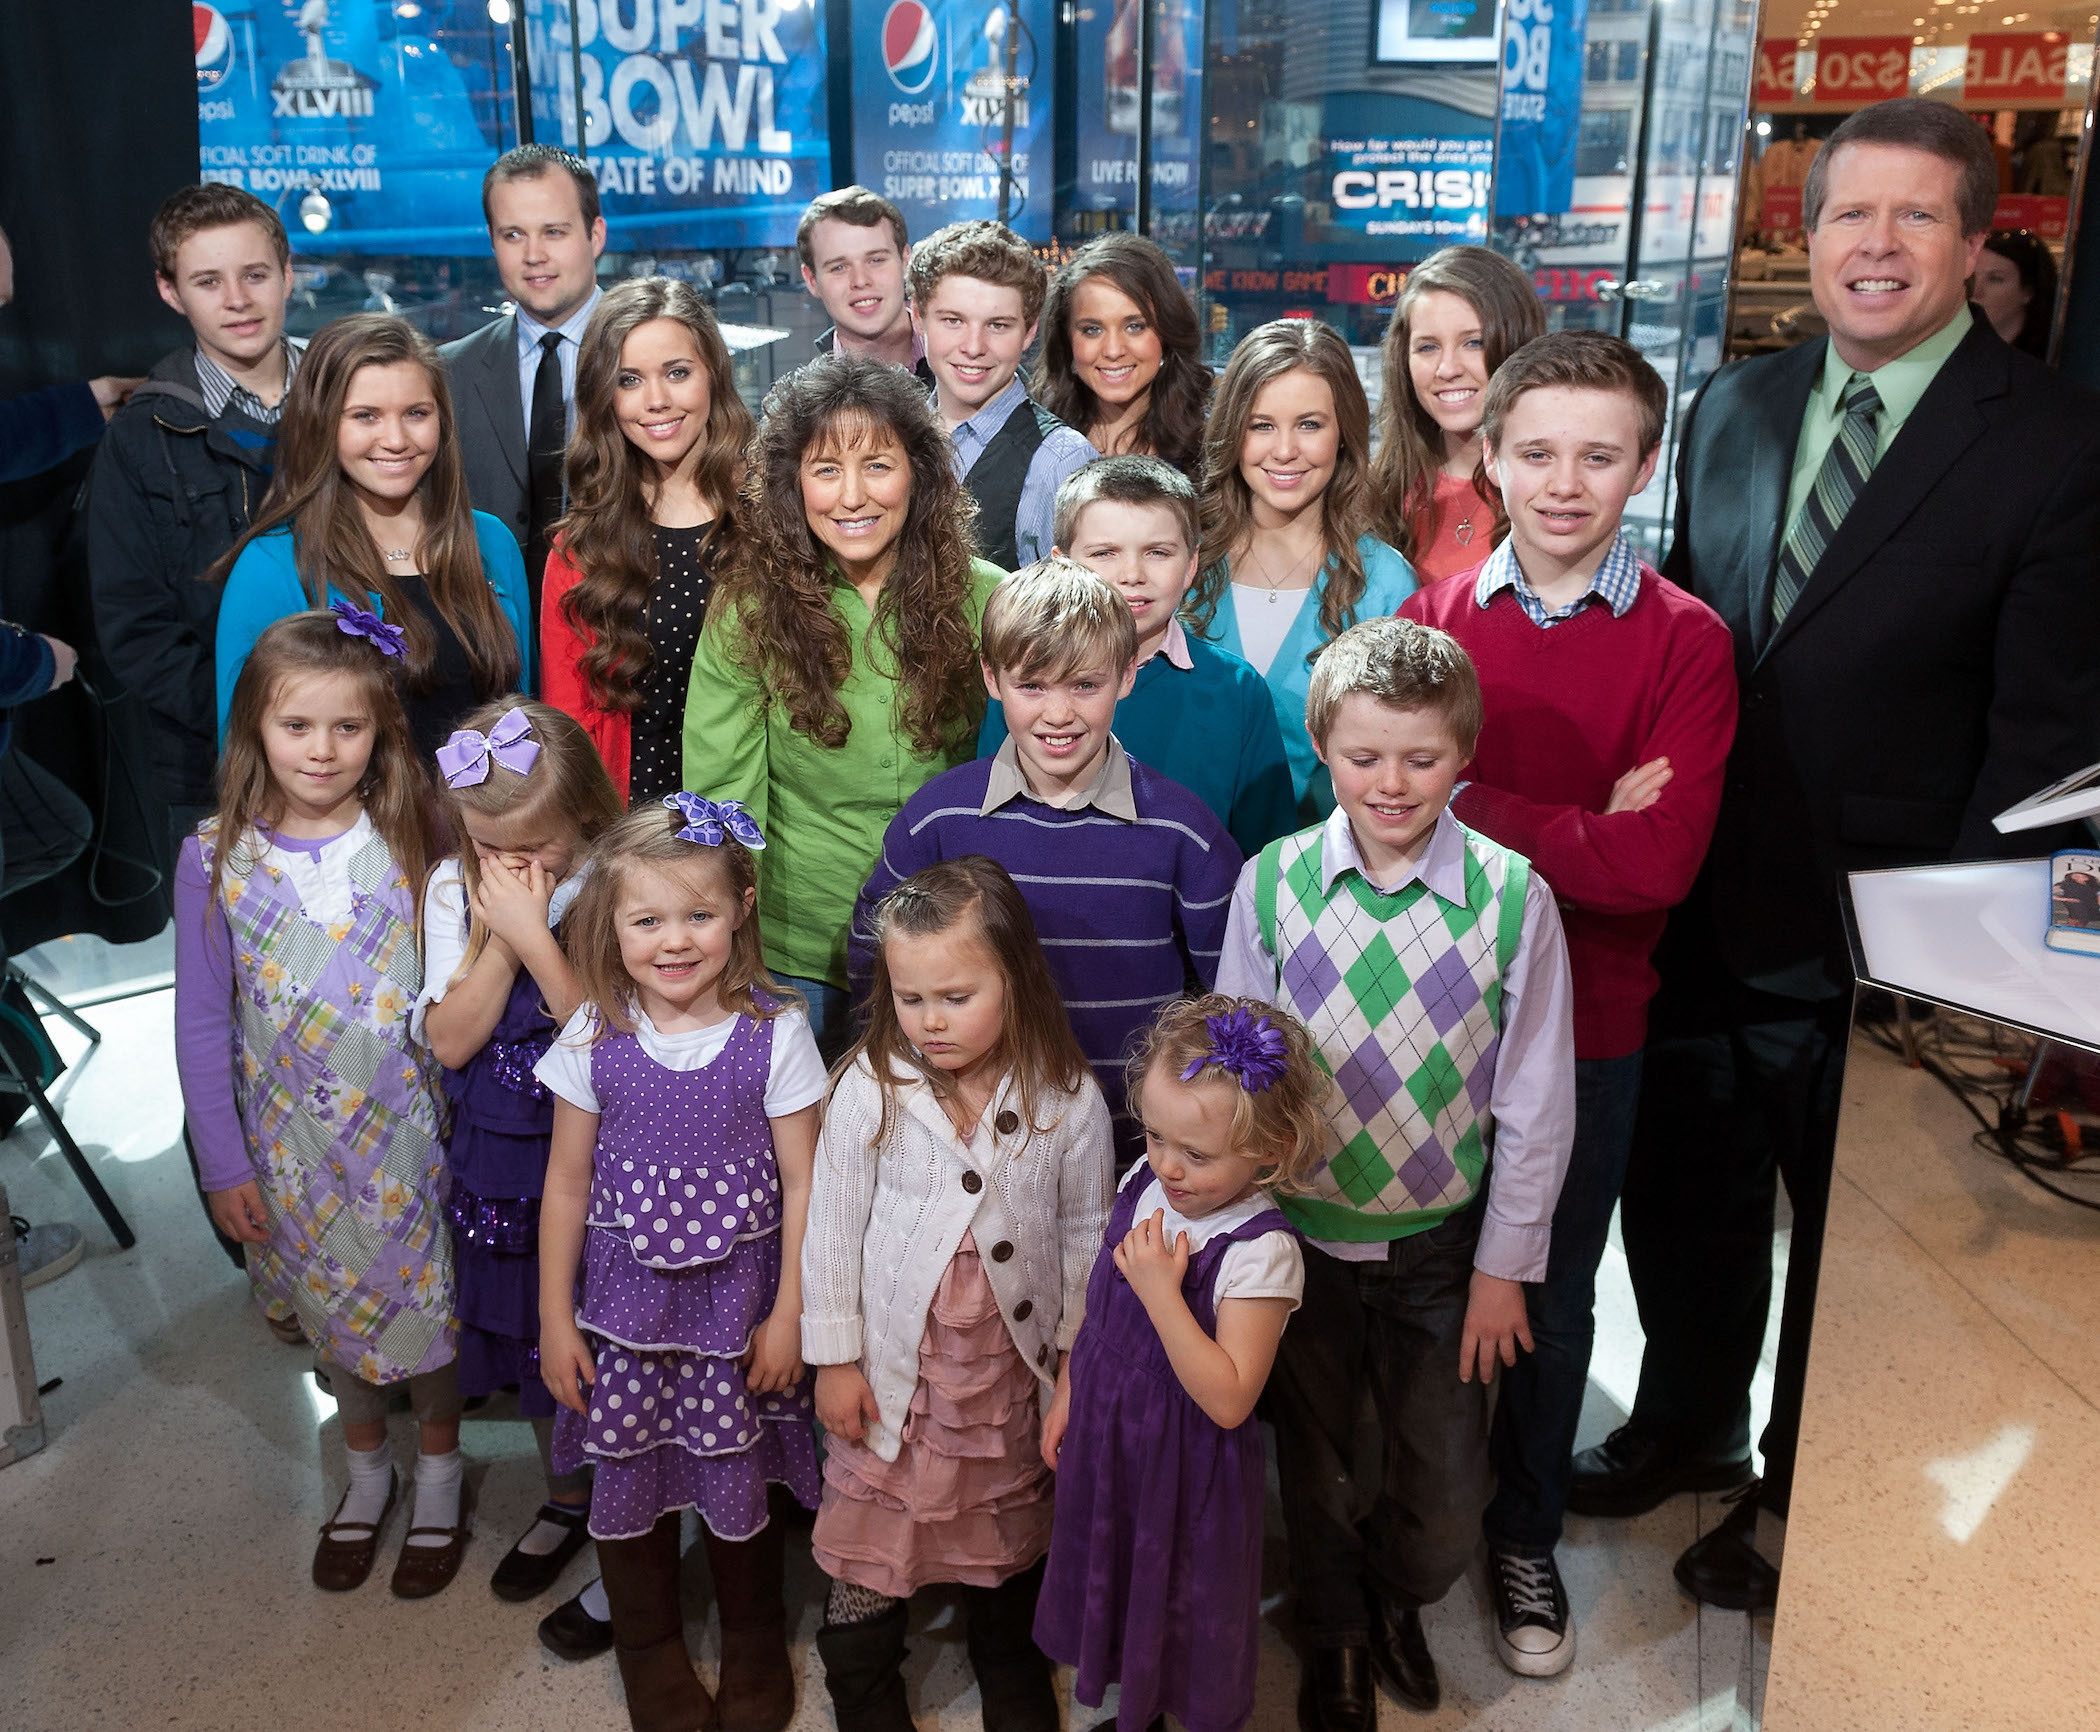 The Duggar family crowded together on a stage looking up at a camera and smiling